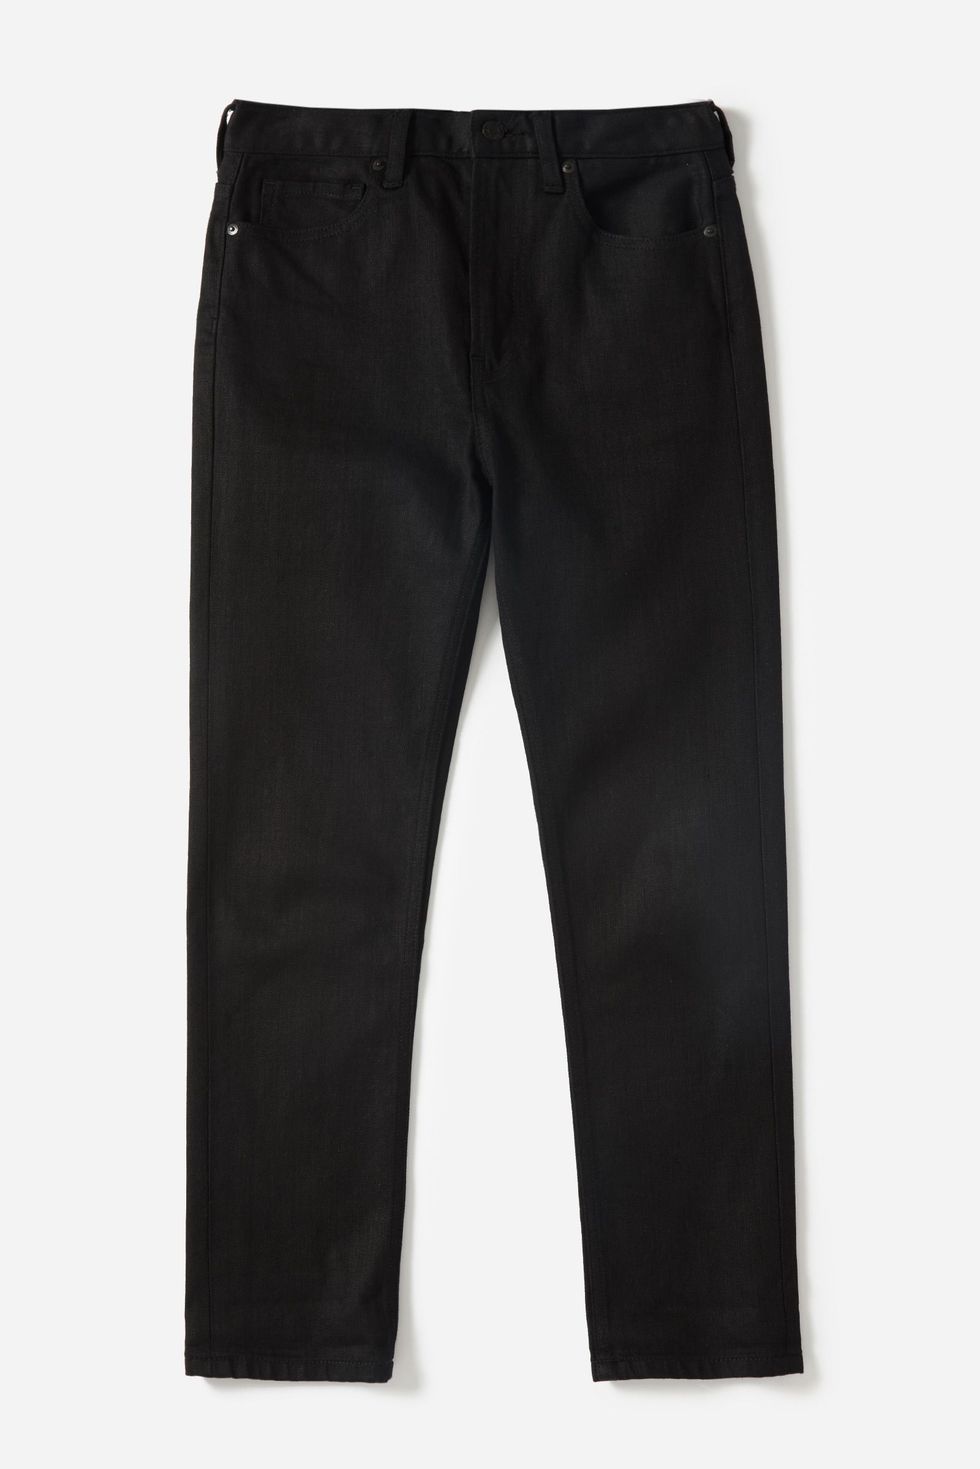 Everlane Just Added More Summer-Friendly Styles to Their Choose What ...